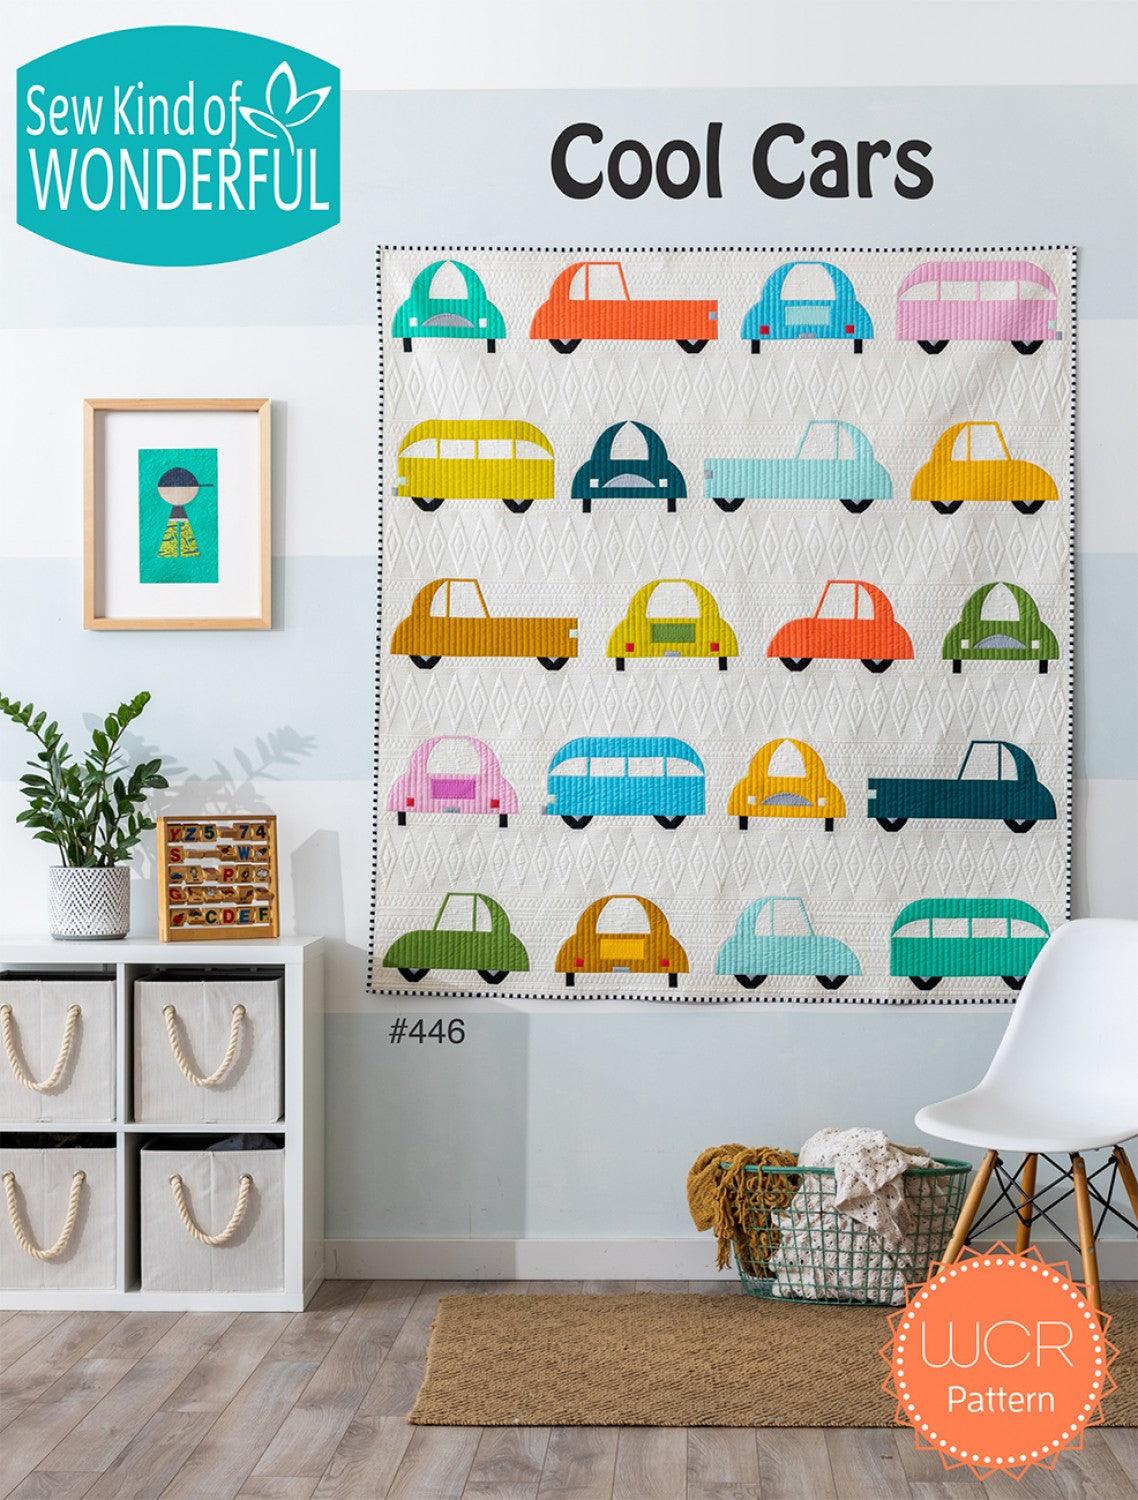 Cool Cars - Quilt Pattern - Sew Kind of Wonderful - Kawartha Quilting and Sewing LTD.